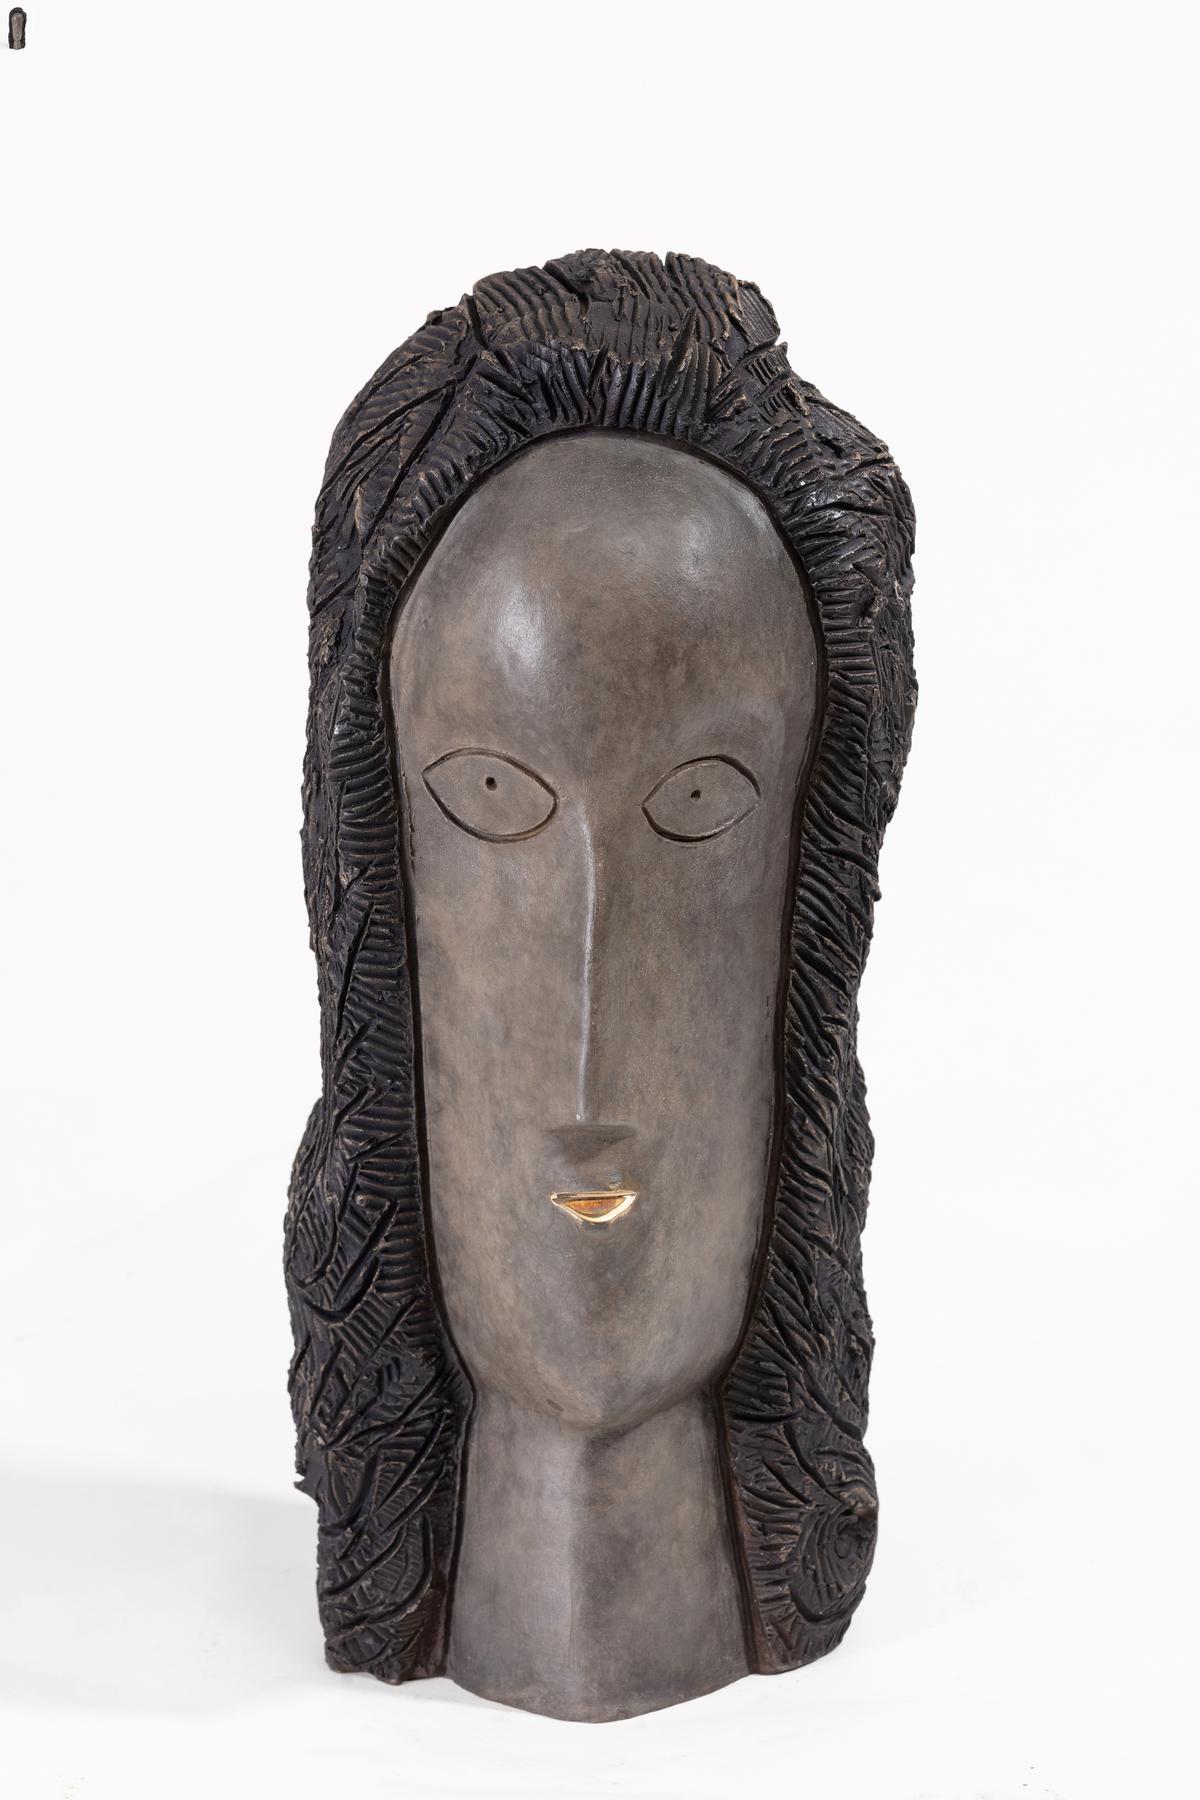 Face in Bronze by Himmat Shah 